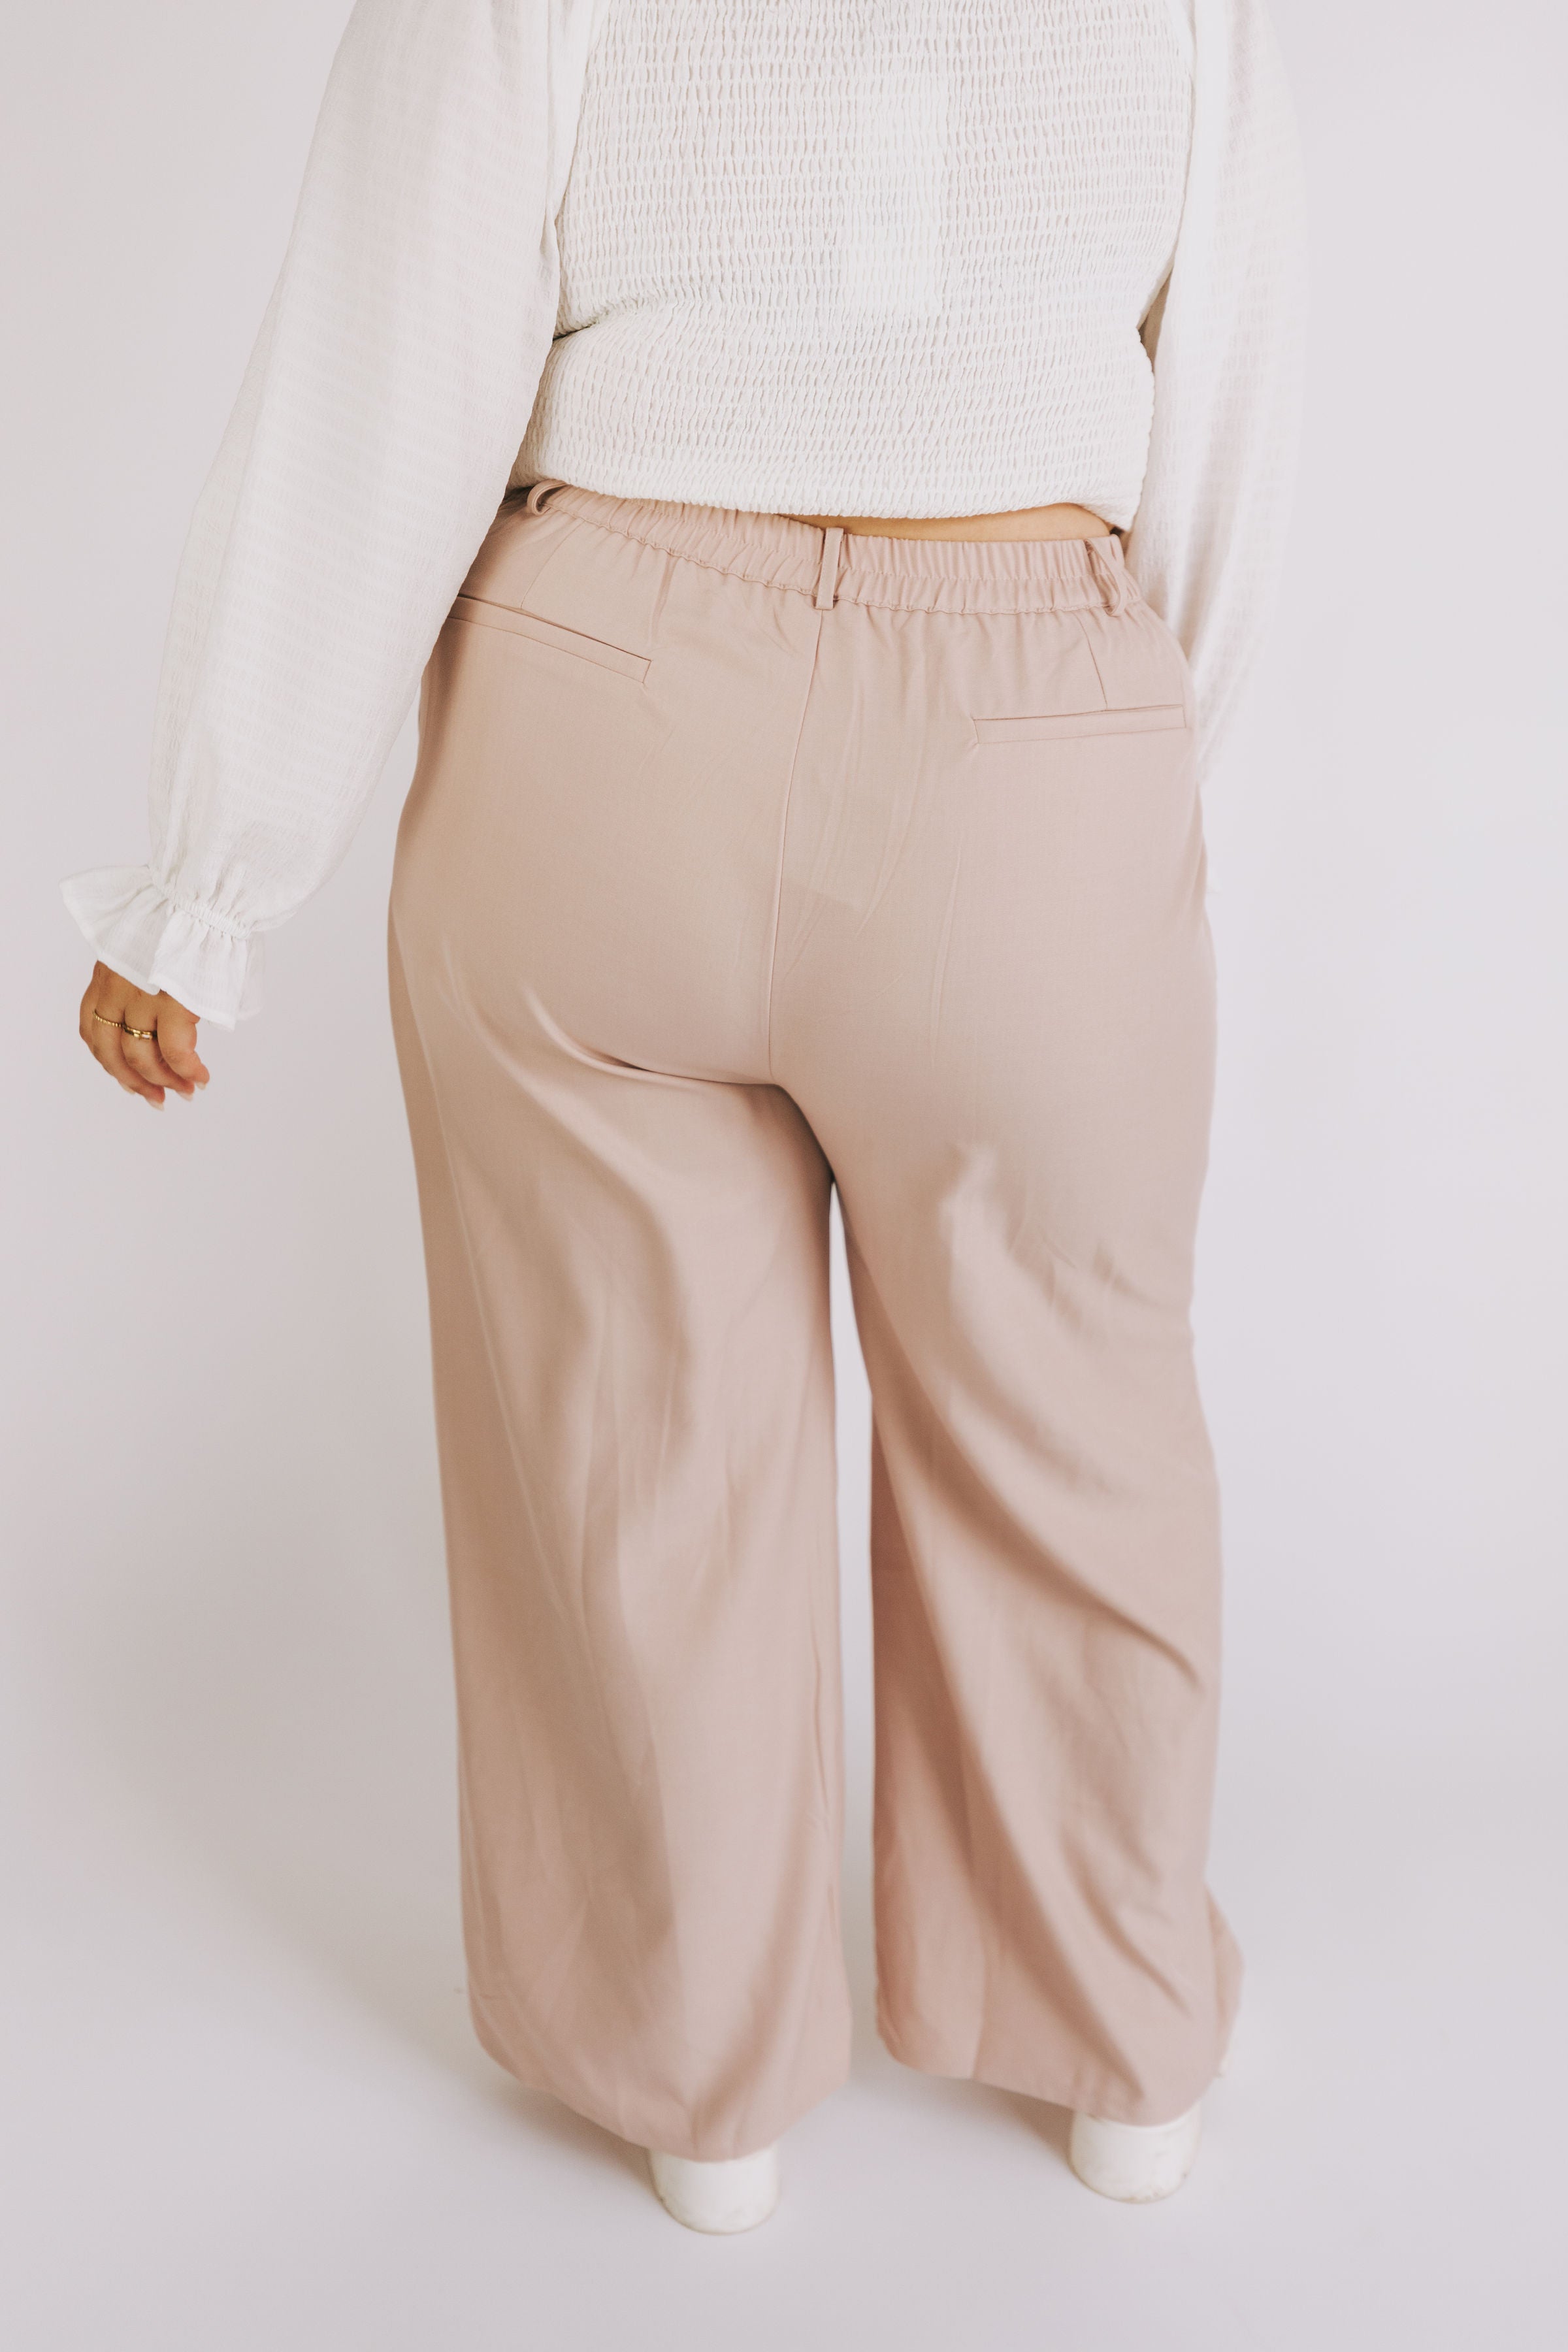 PLUS SIZE - Going Downtown Pants